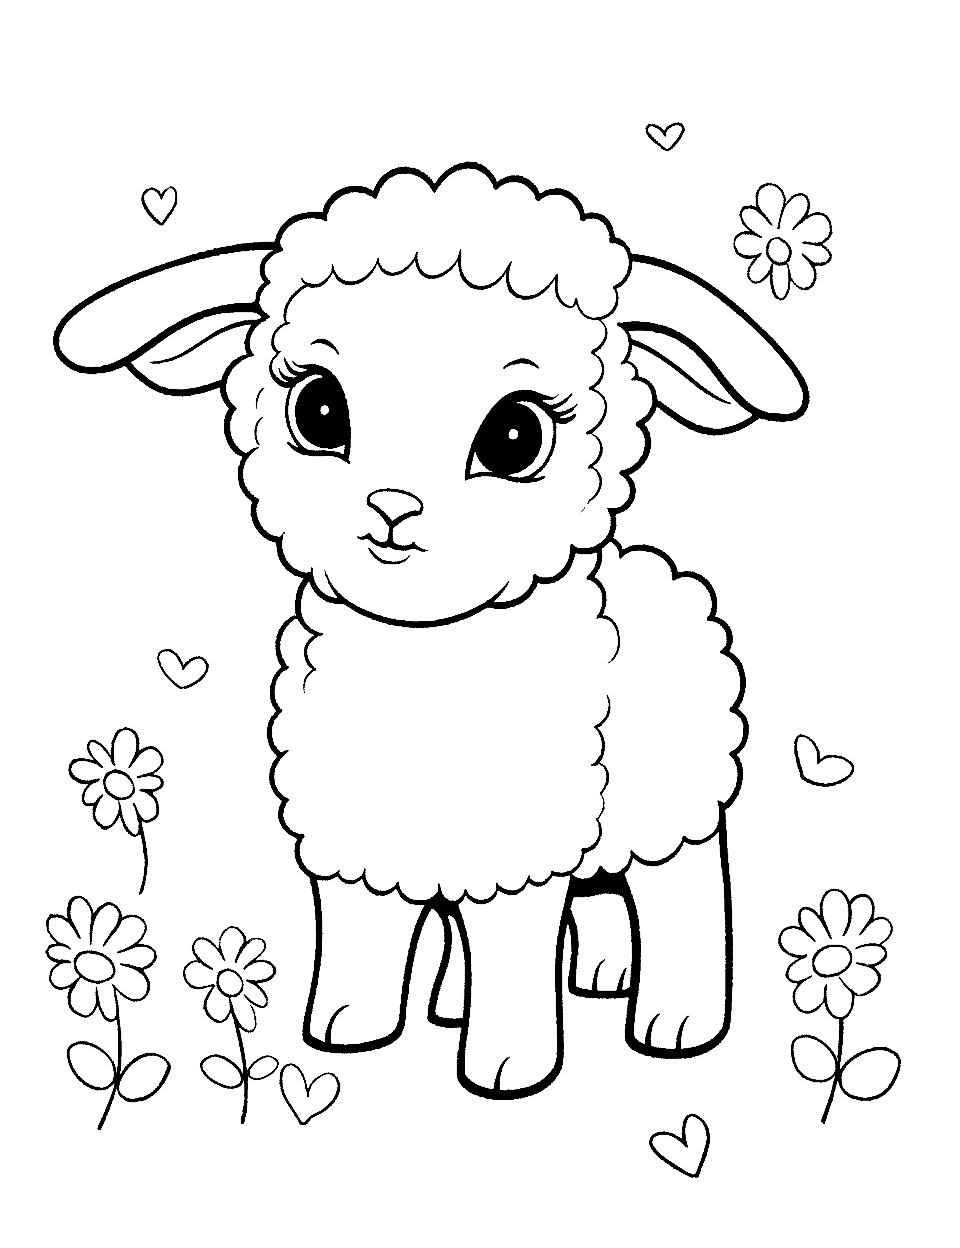 Cute Lamb Easter Coloring Page - A fluffy lamb surrounded by daisies representing innocence and the joy of Easter.